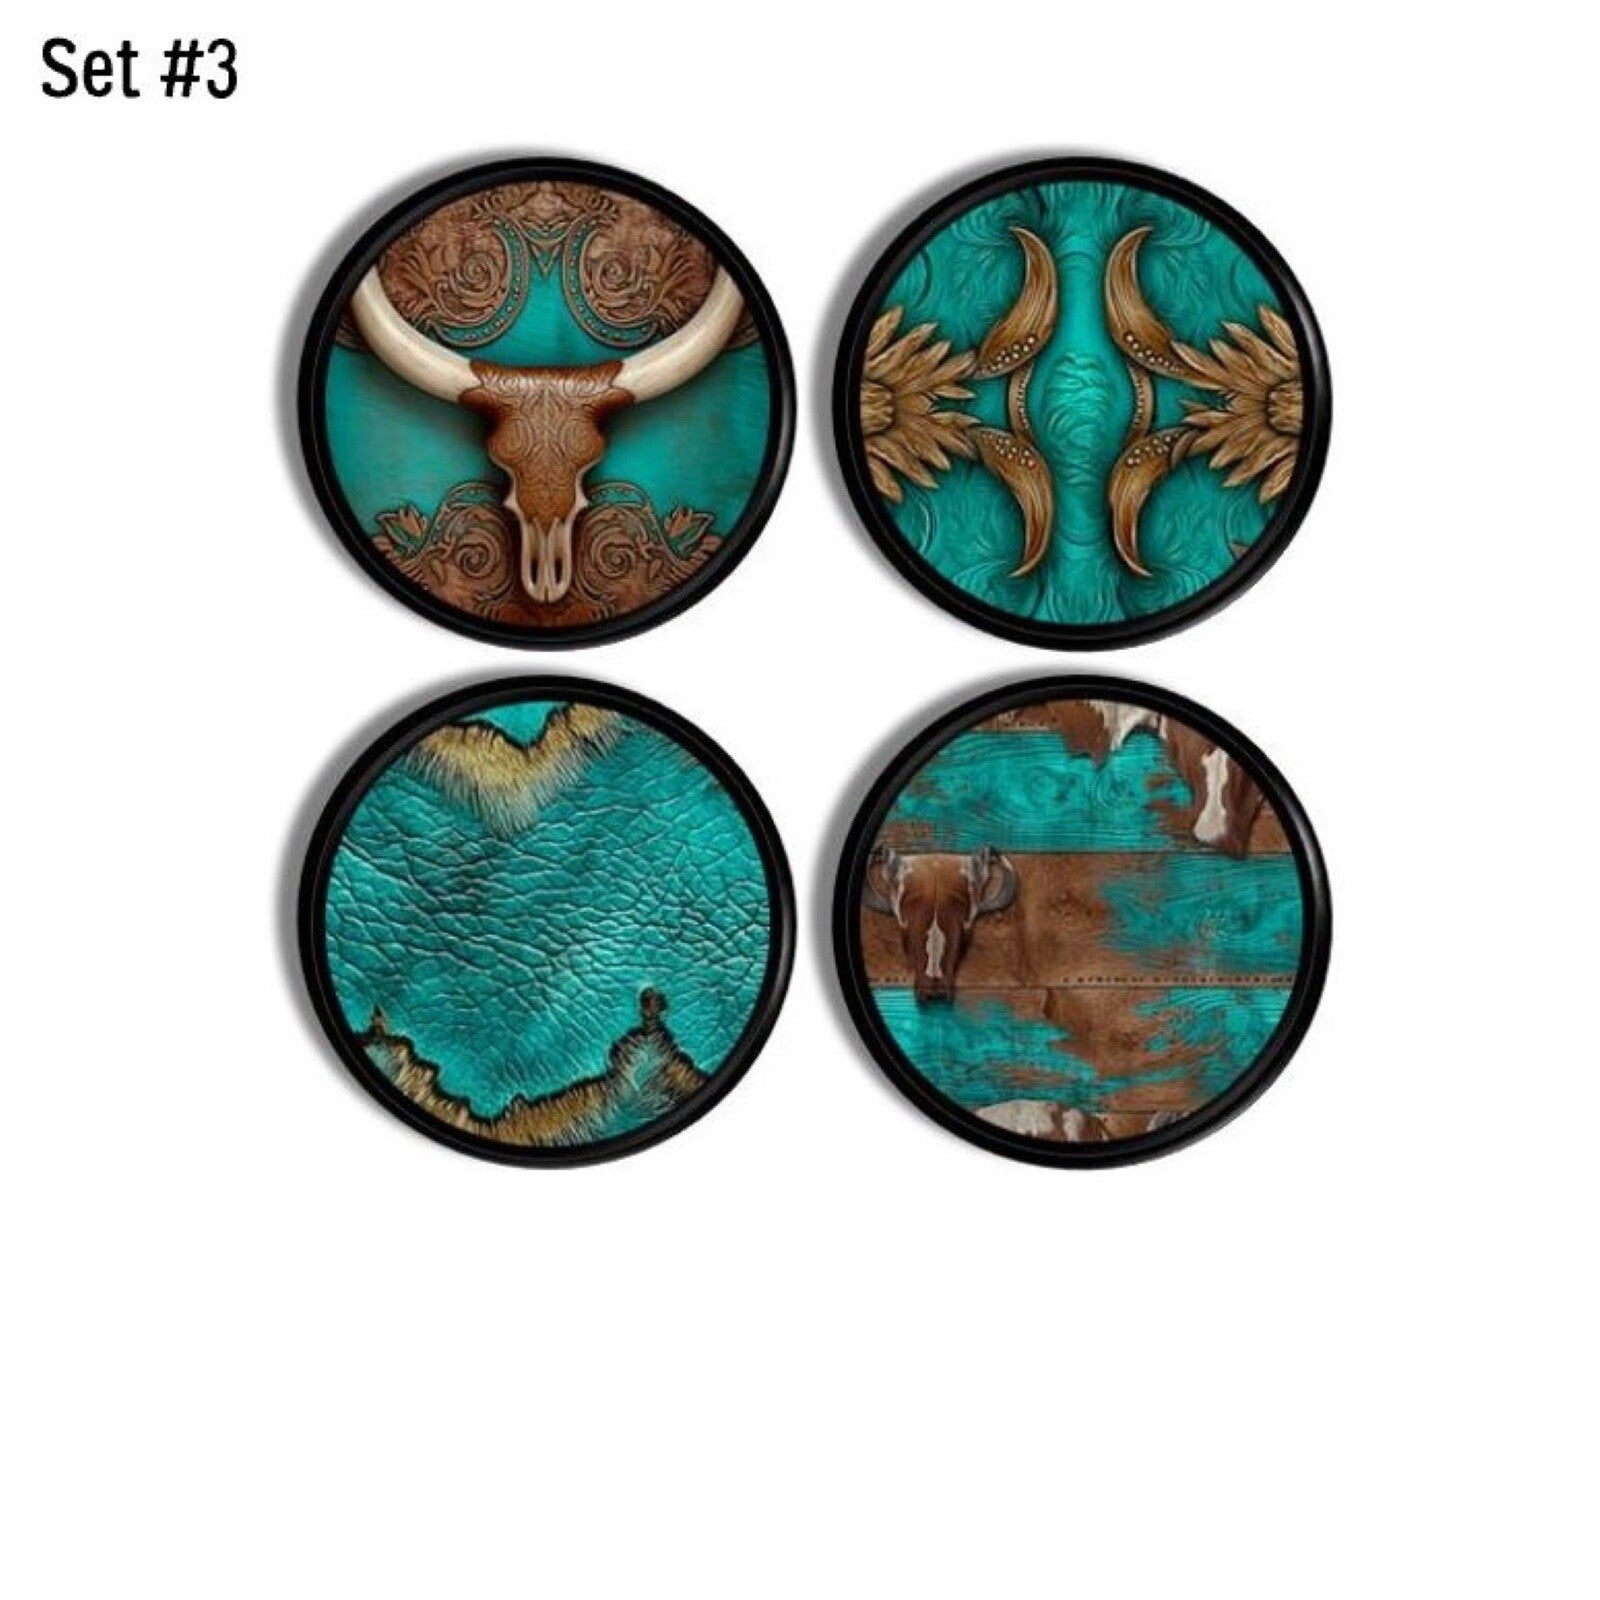 Set of 4 southwestern ranch themed knob cabinet door handles featuring steer head, leatherwork, weathered wood and cowhide designs.